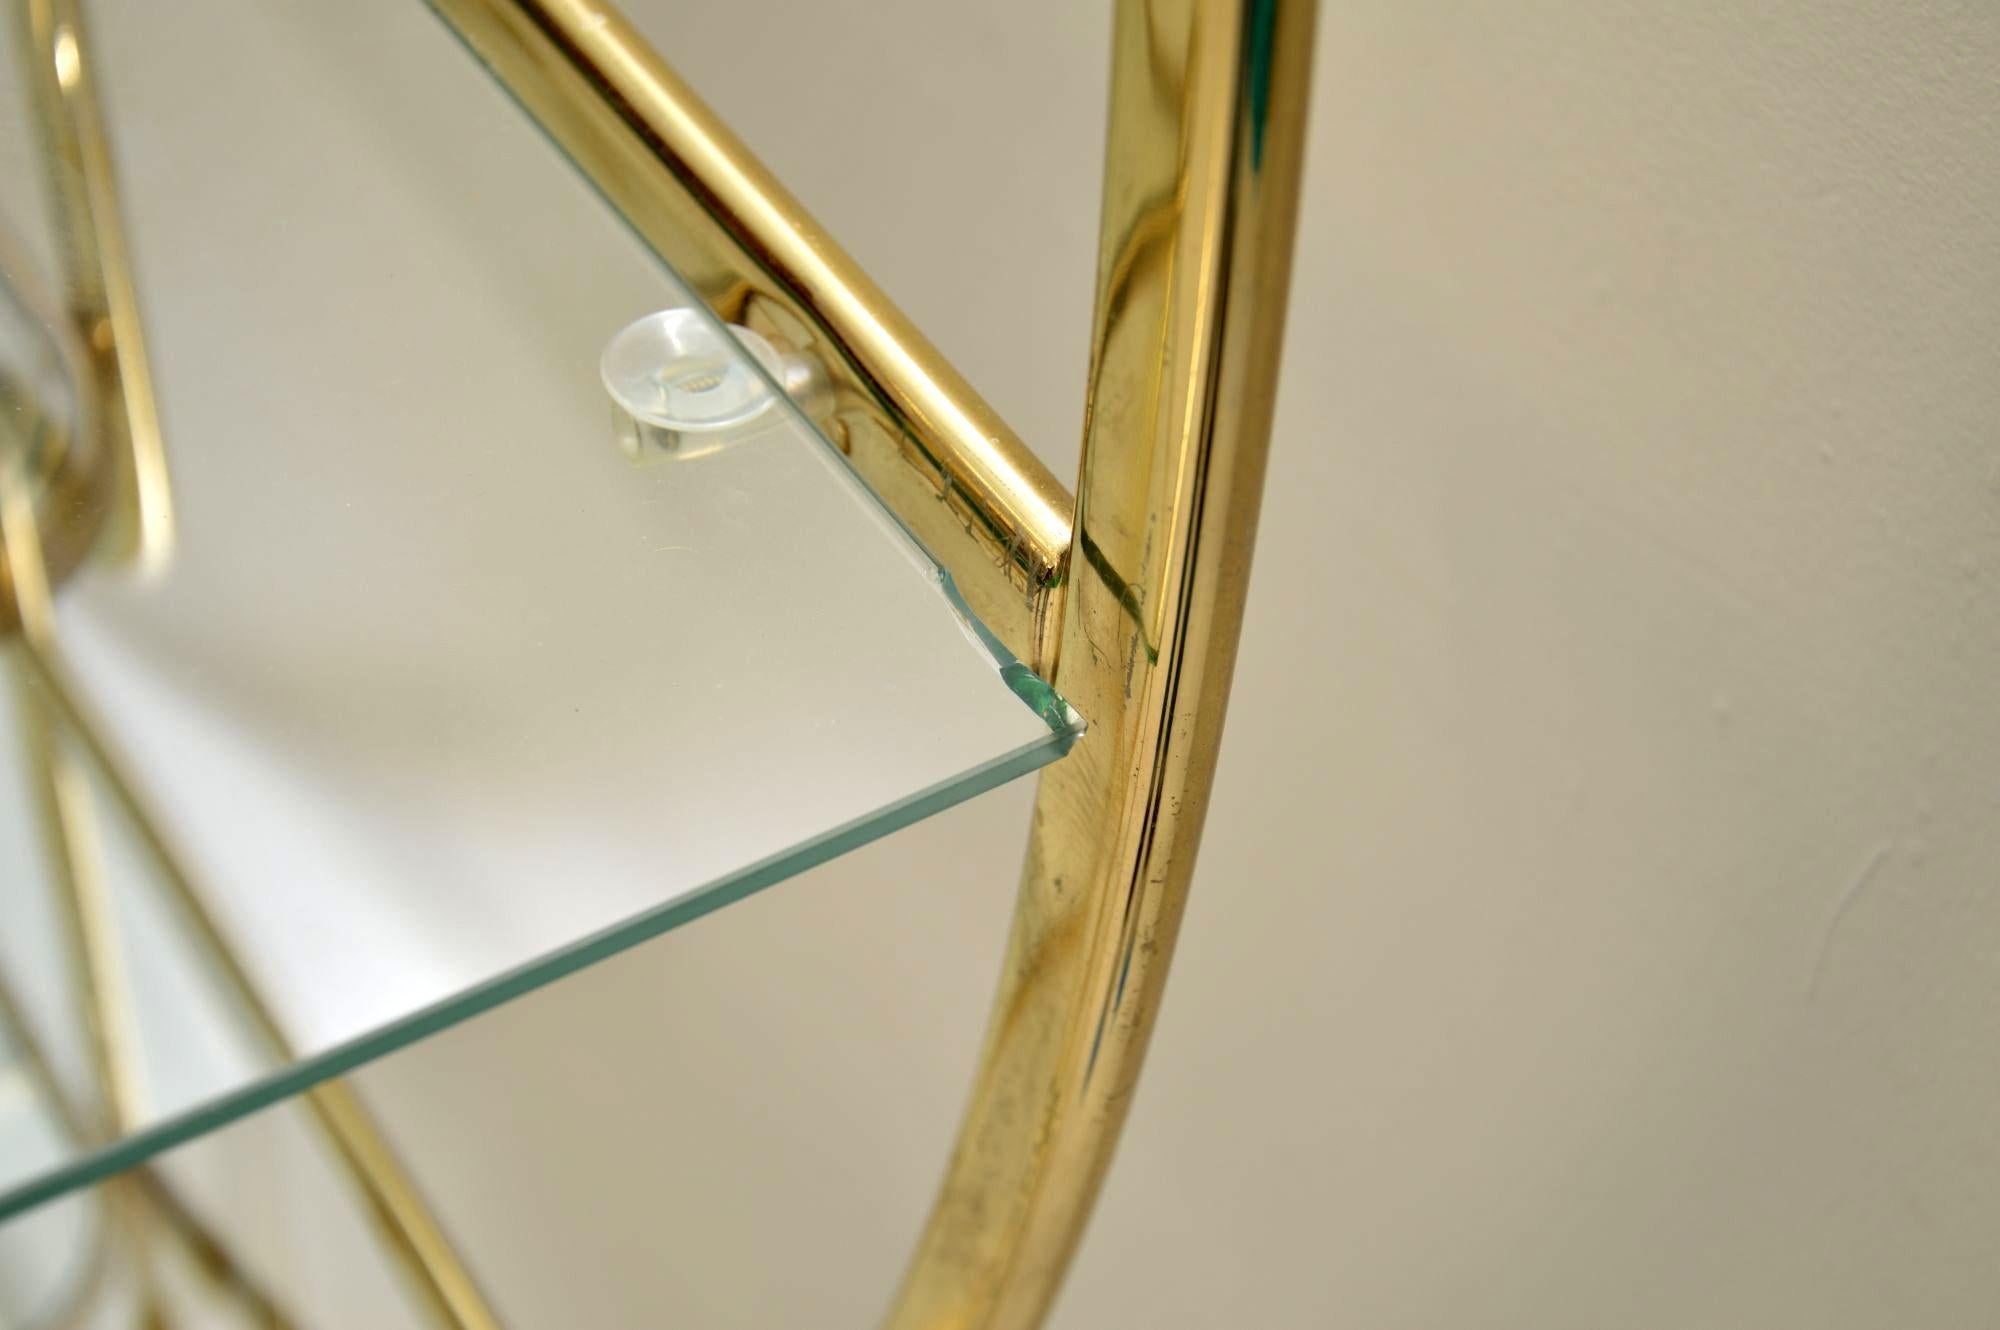 1970s Italian Vintage Brass and Glass Display Cabinet or Bookcase im Zustand „Gut“ in London, GB